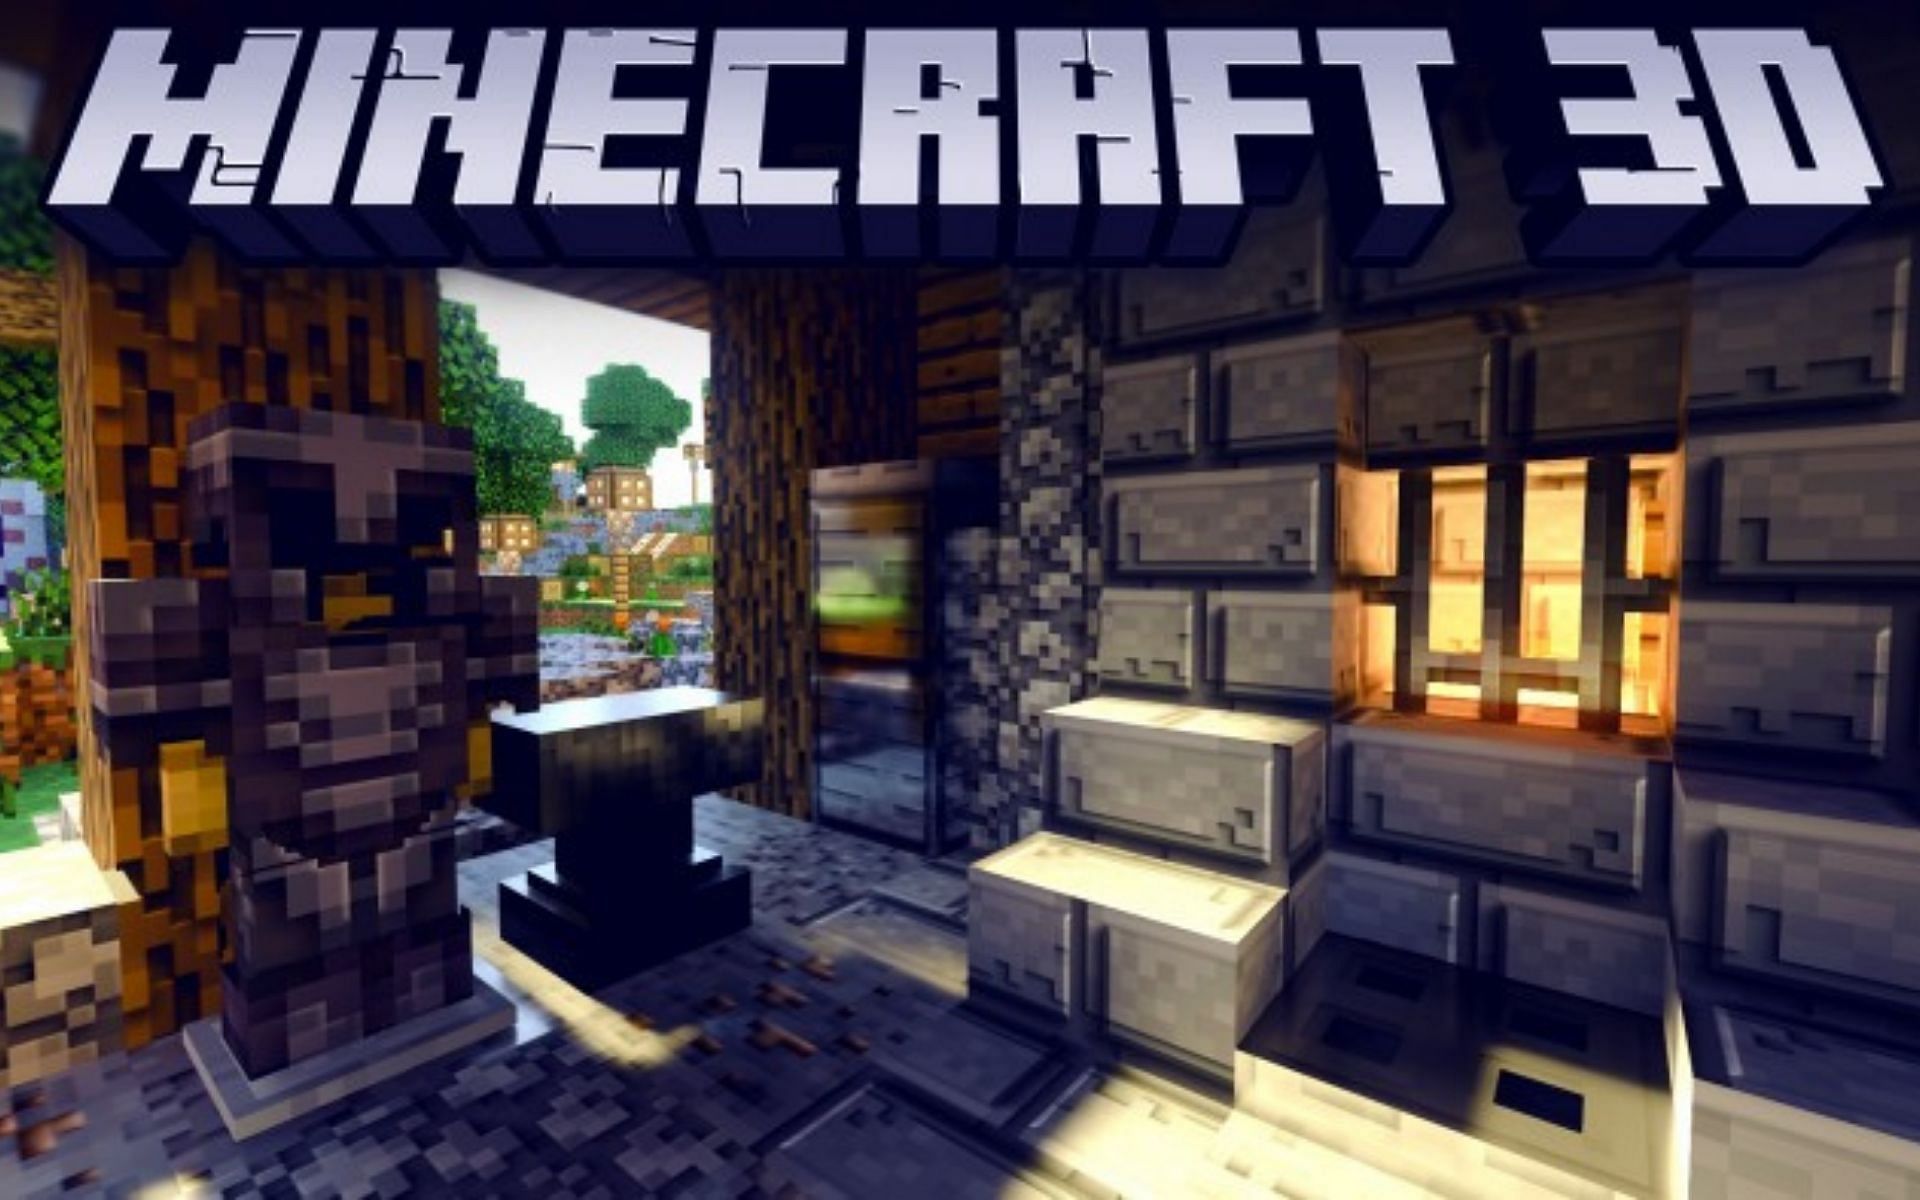 Minecraft 3D adds amazing 3D effect to the game (Image via app-1stock)